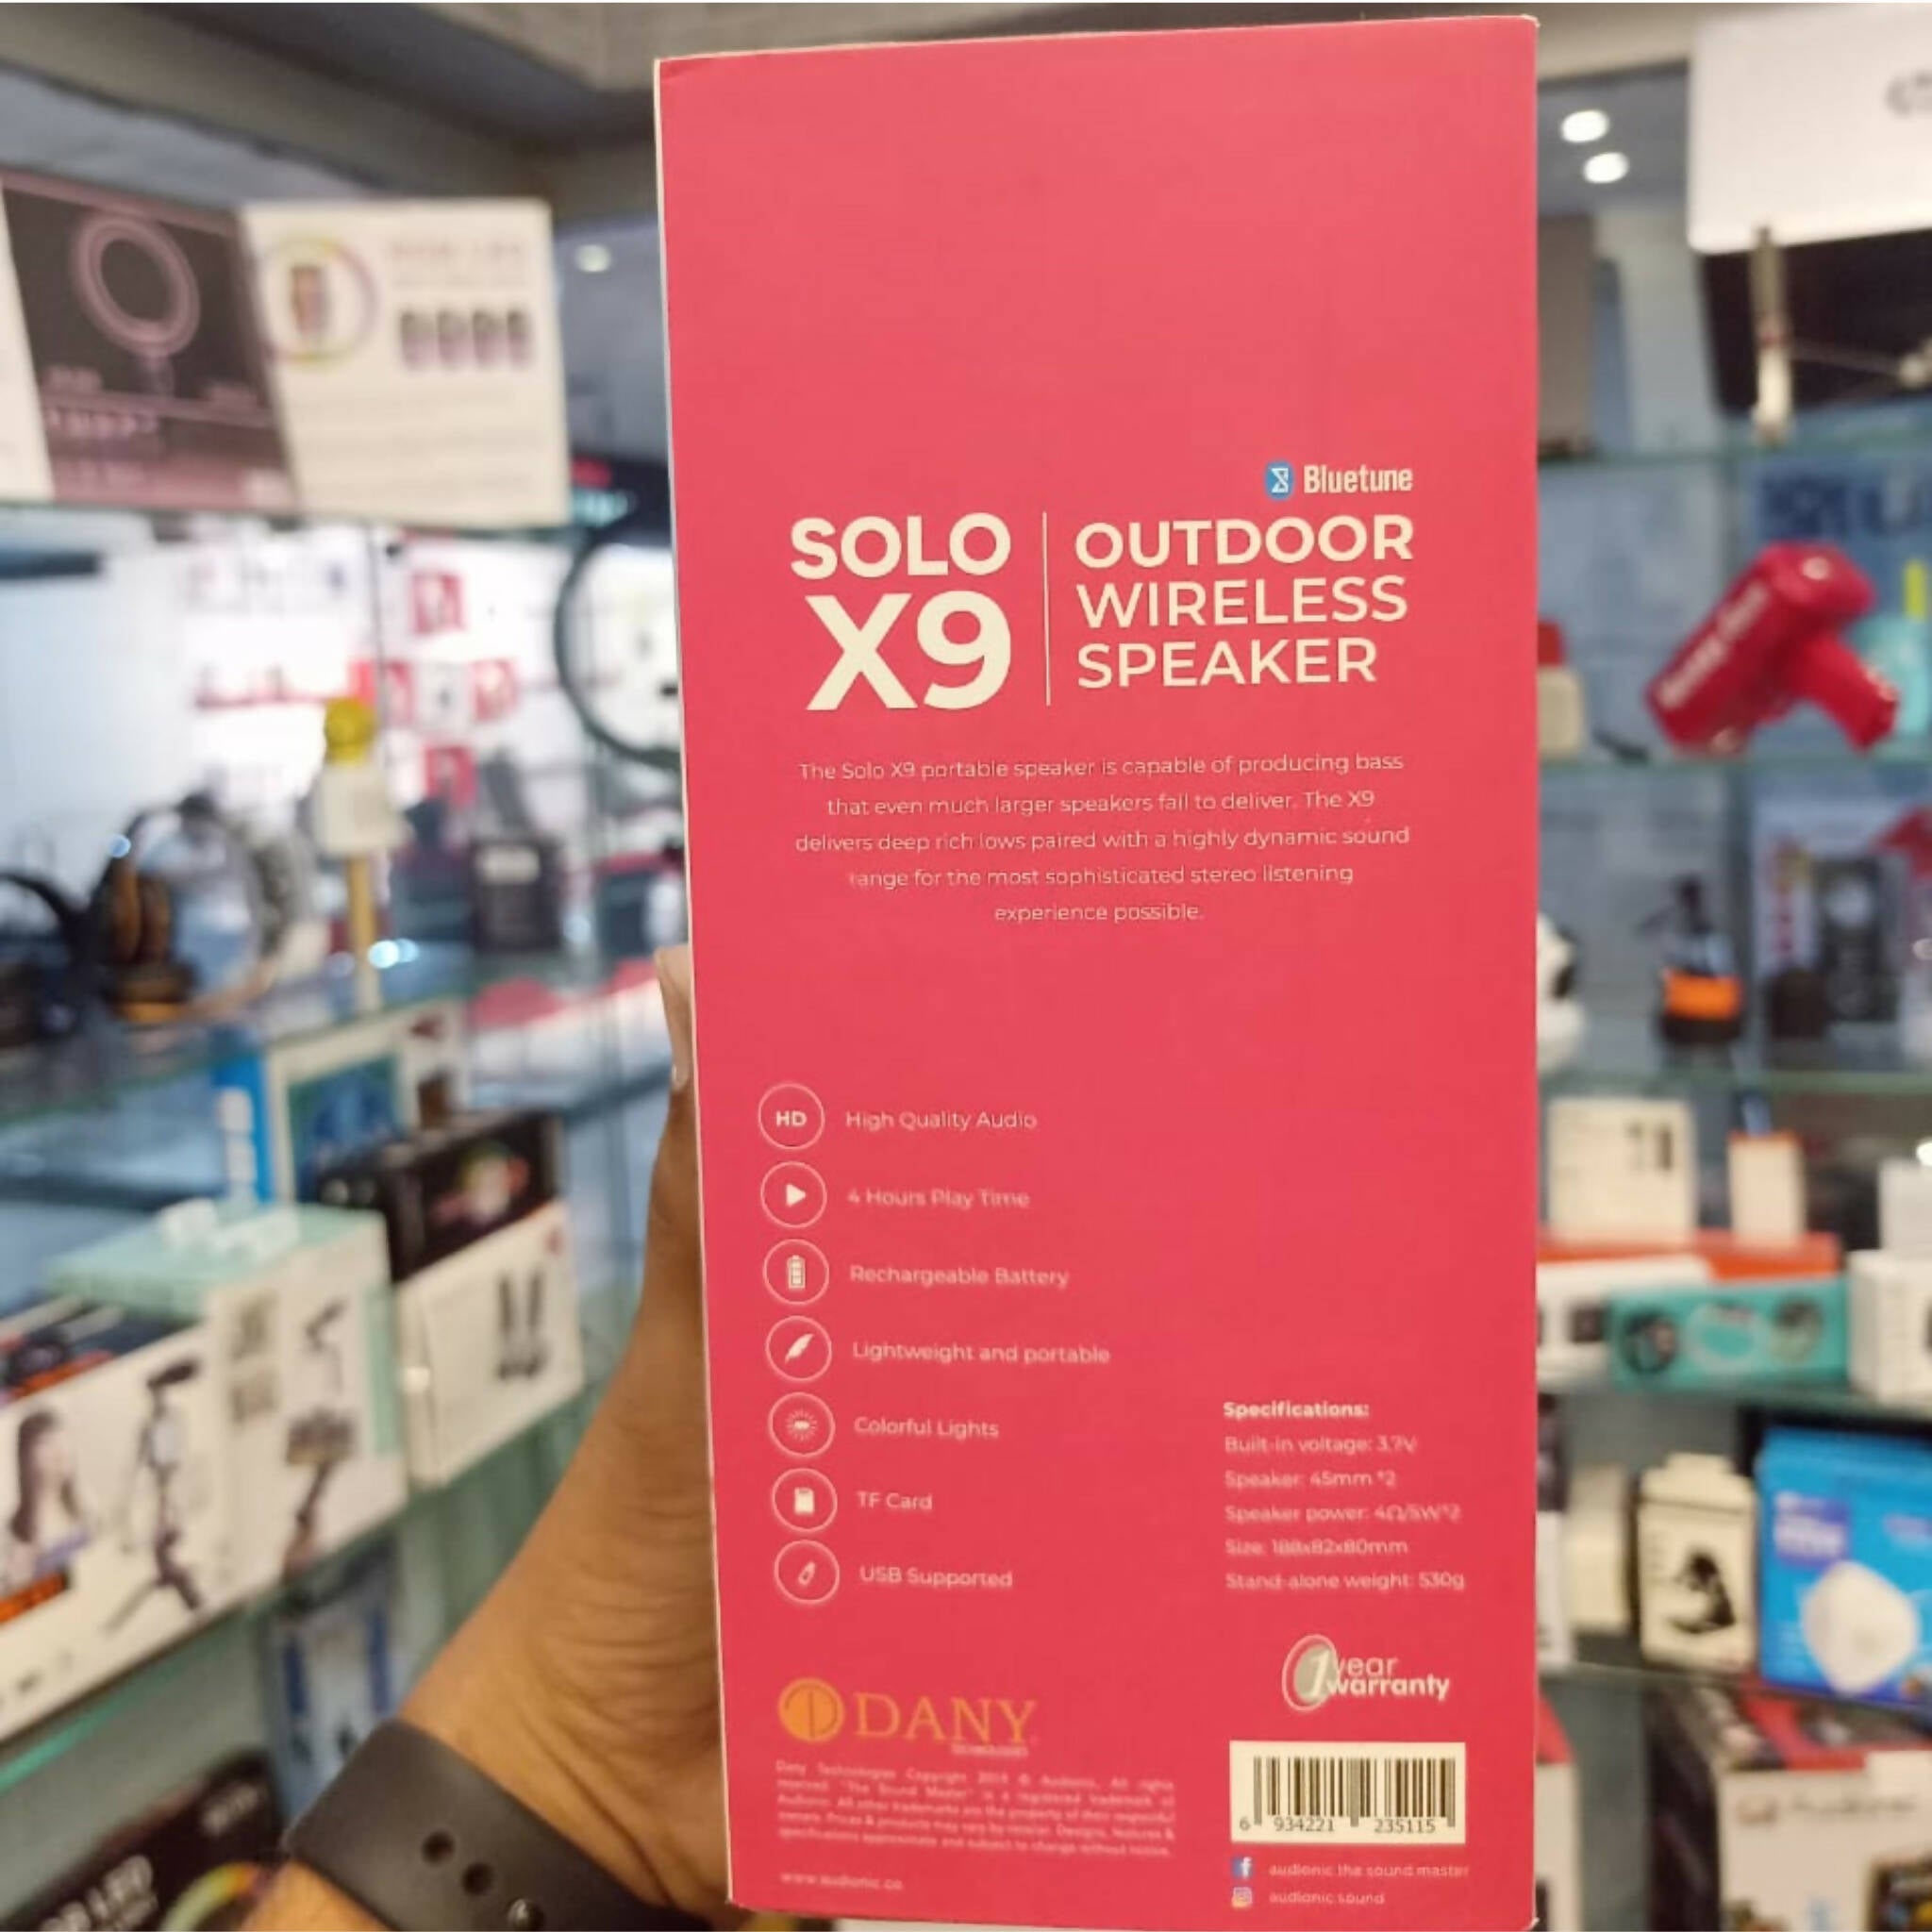 Speaker, Audionic Solo X9 & Bluetooth Supported